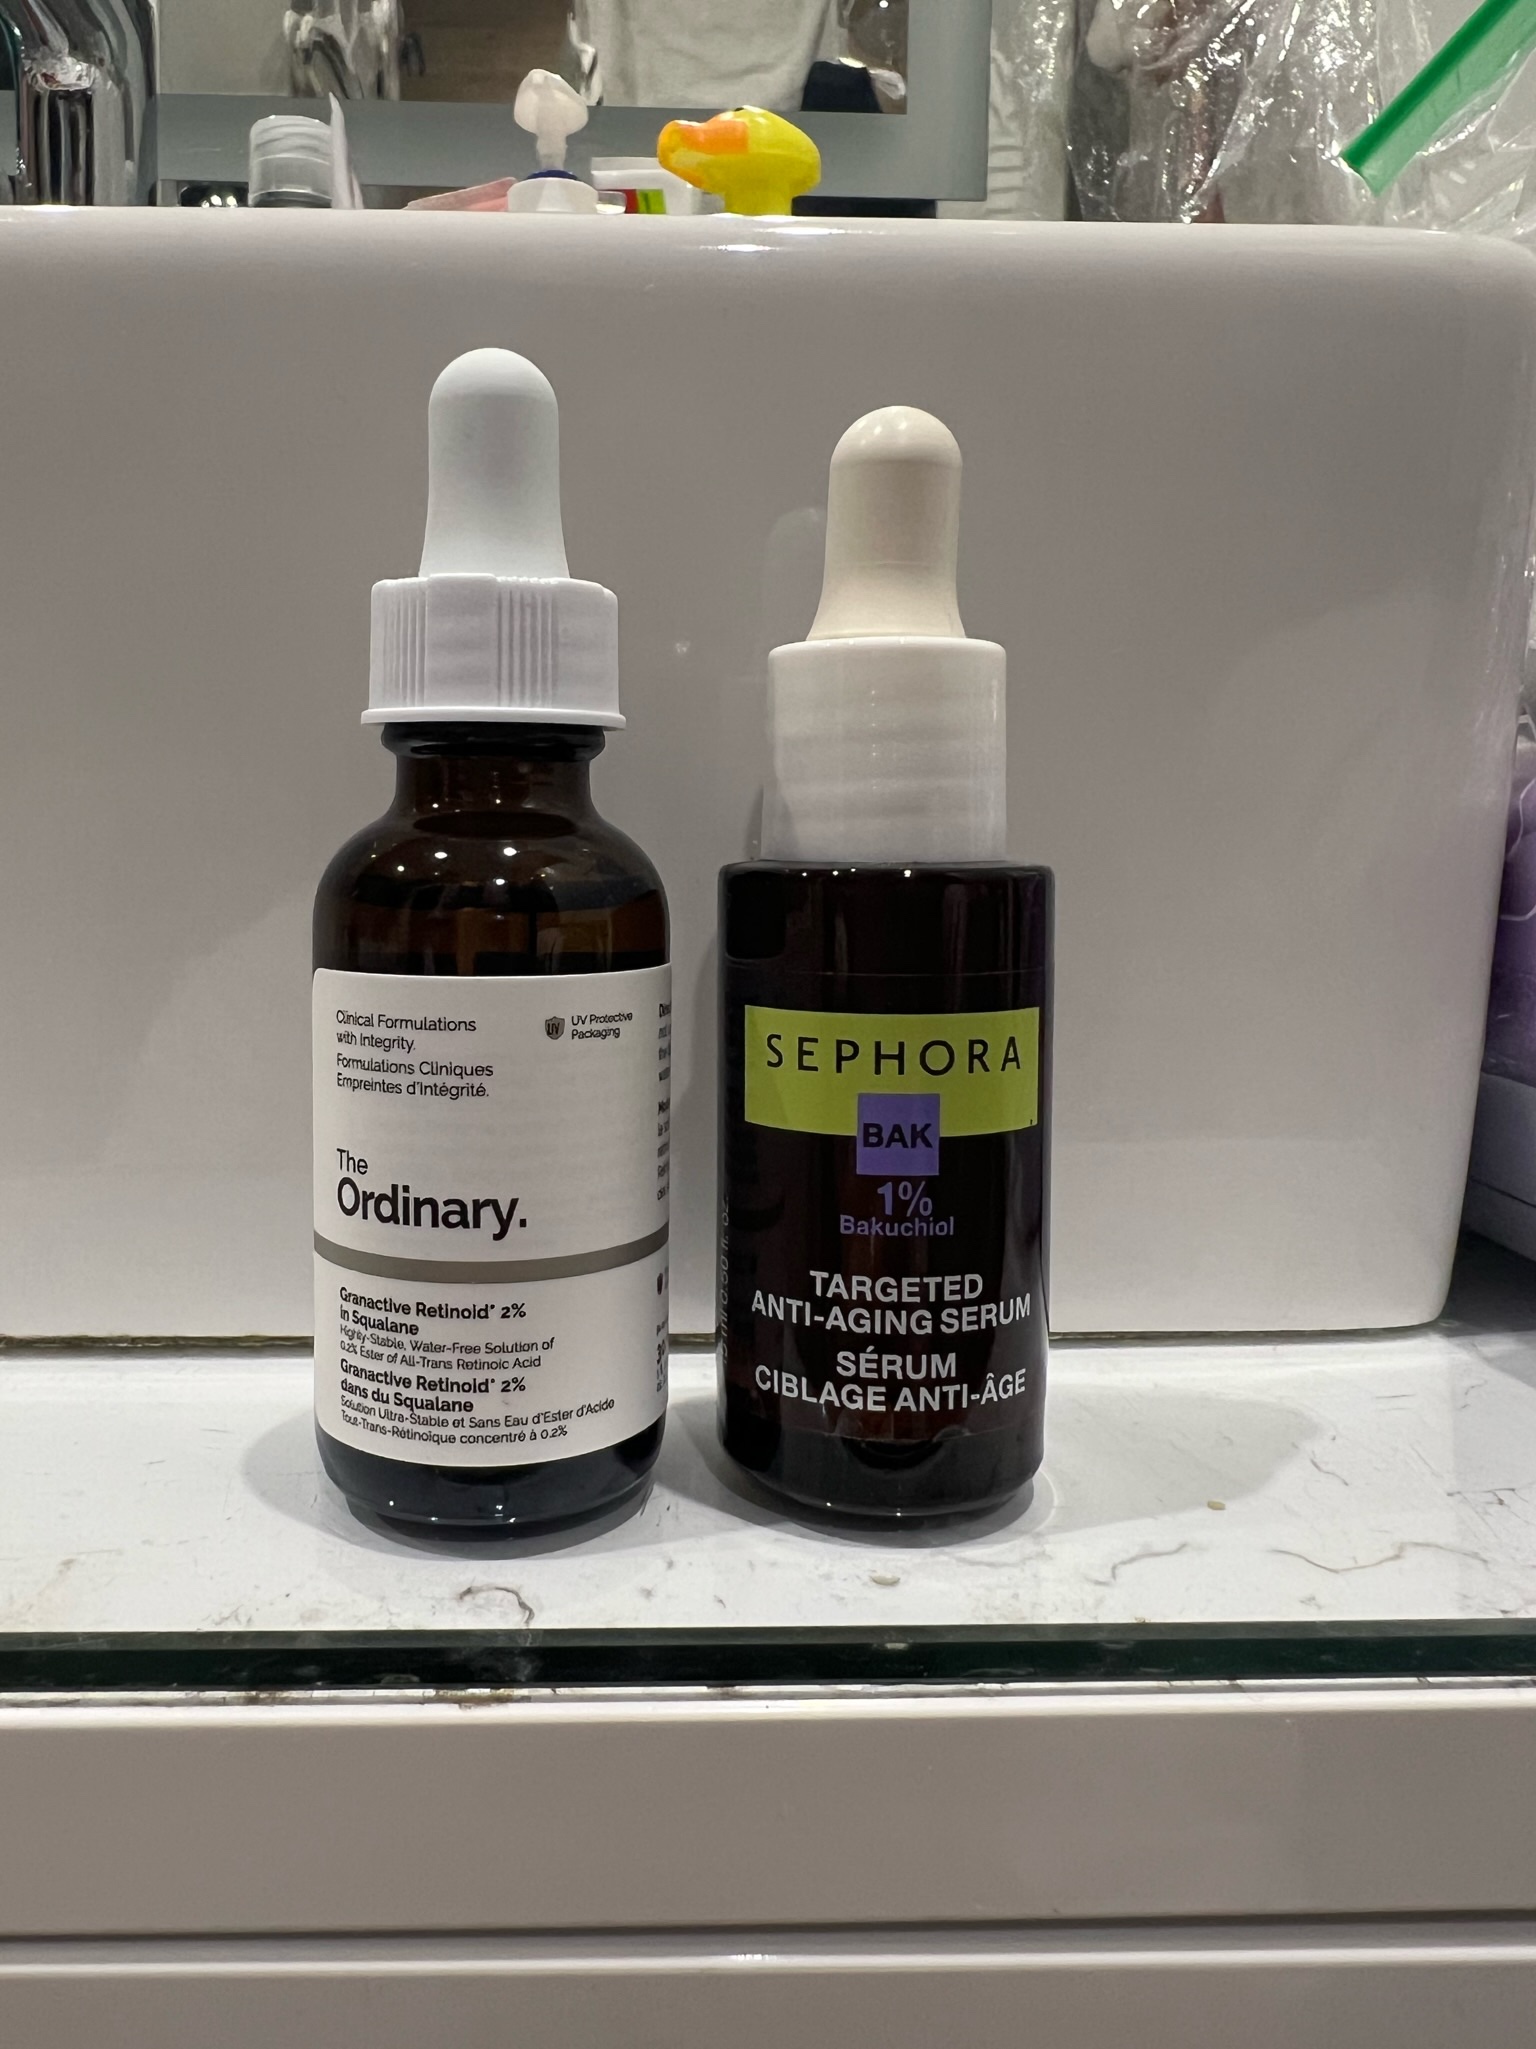 Battle of Affordable Anti-Aging Serums: The Ordinary vs. Sephora